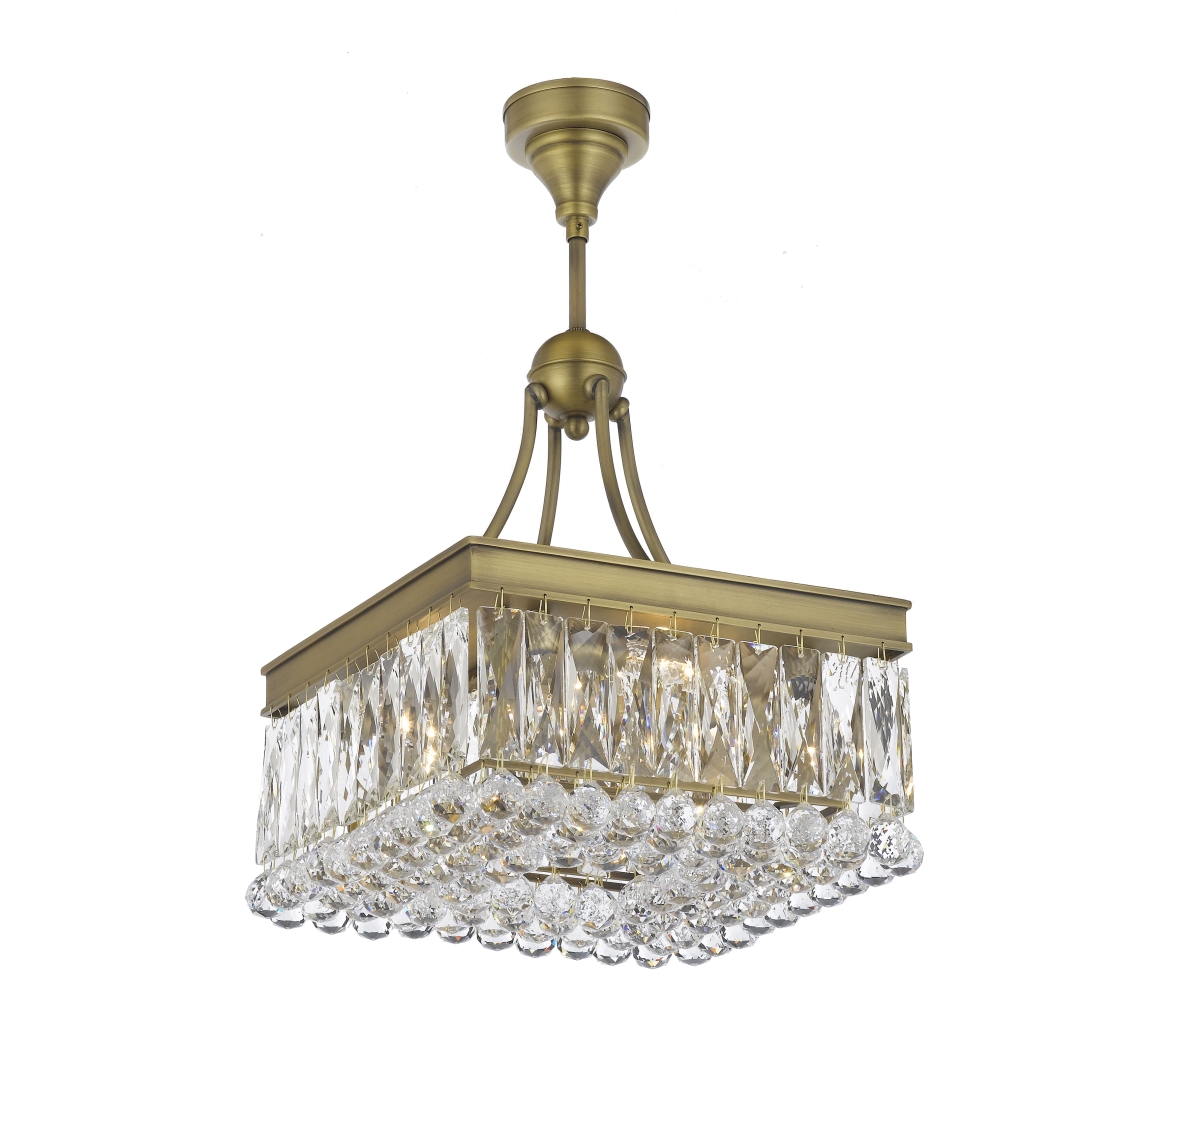 Pwg Lighting 2904-14-ag 14 In. Valencia Hanging Chandelier With Heirloom Grandcut Crystals - Antique Gold